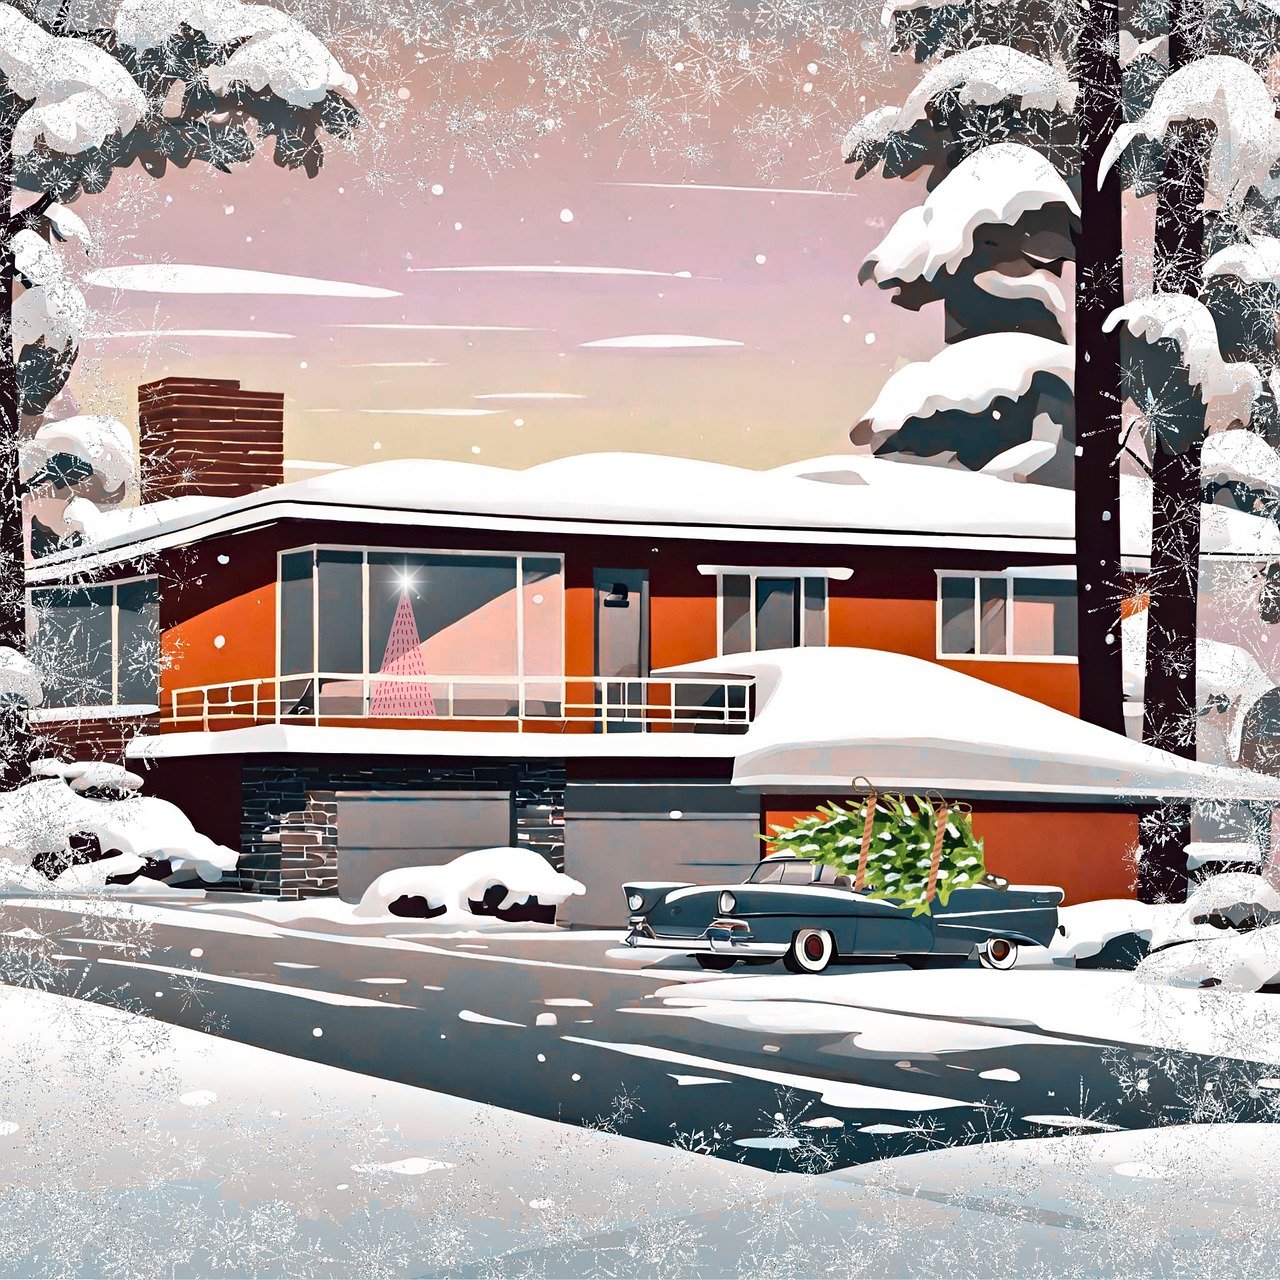 A Midcentury Home for the Holidays